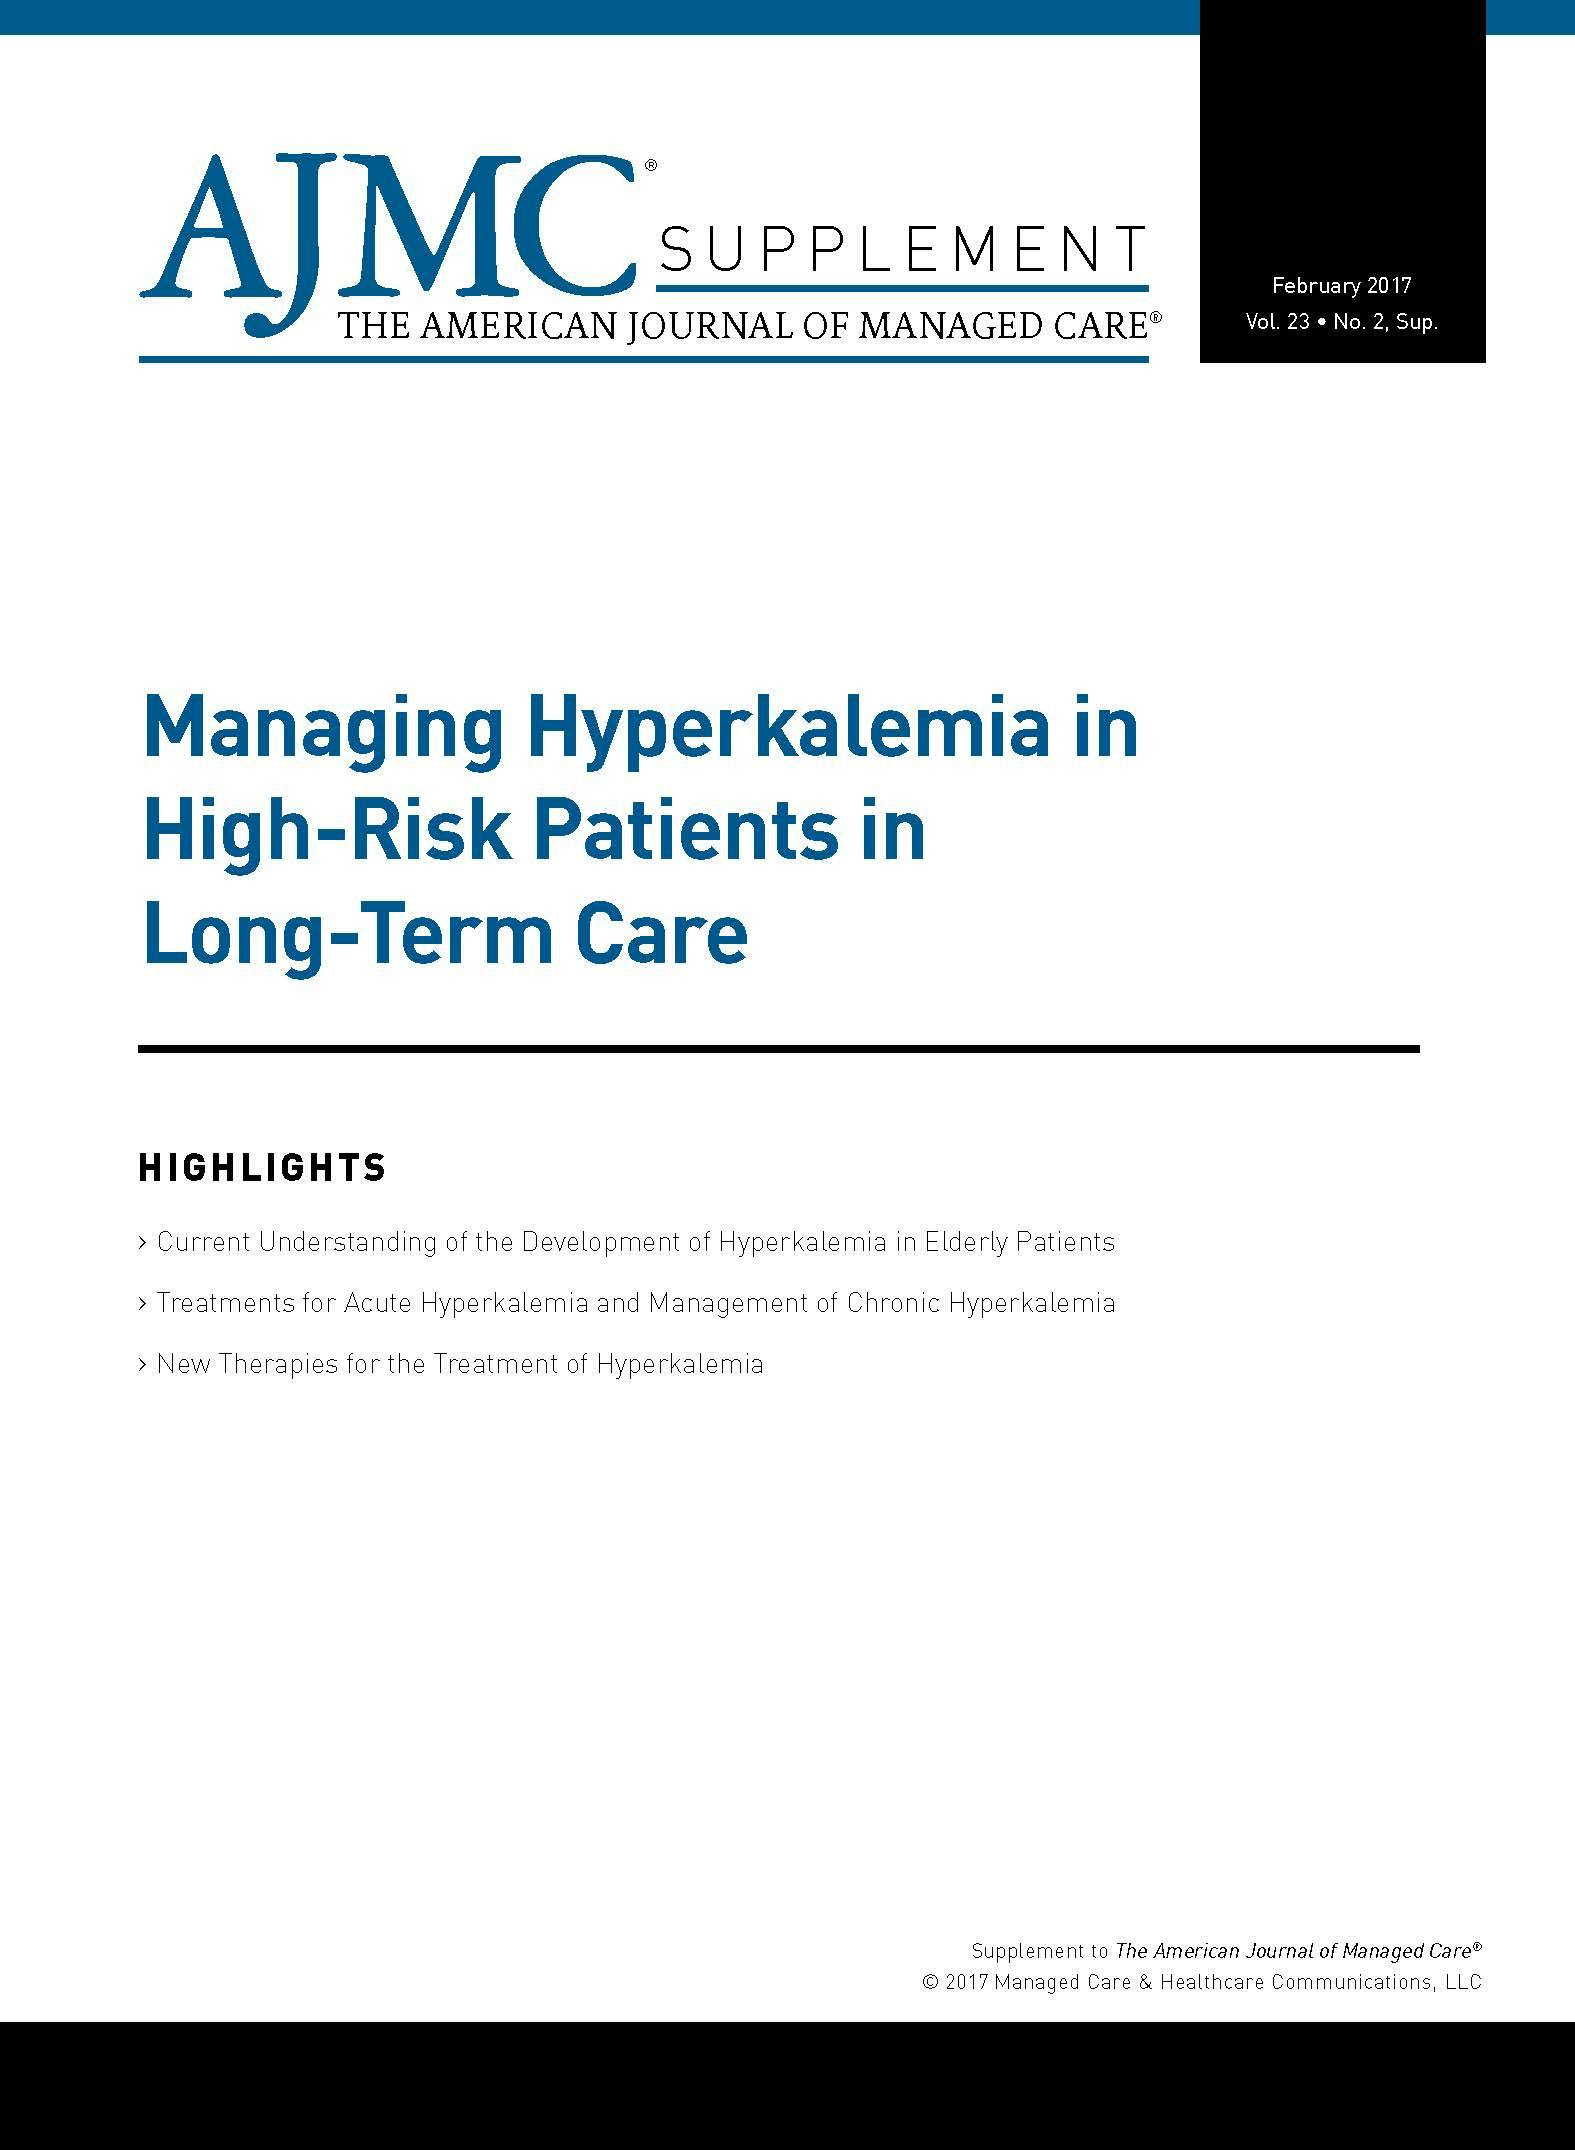 Managing Hyperkalemia in High-Risk Patients in Long-Term Care